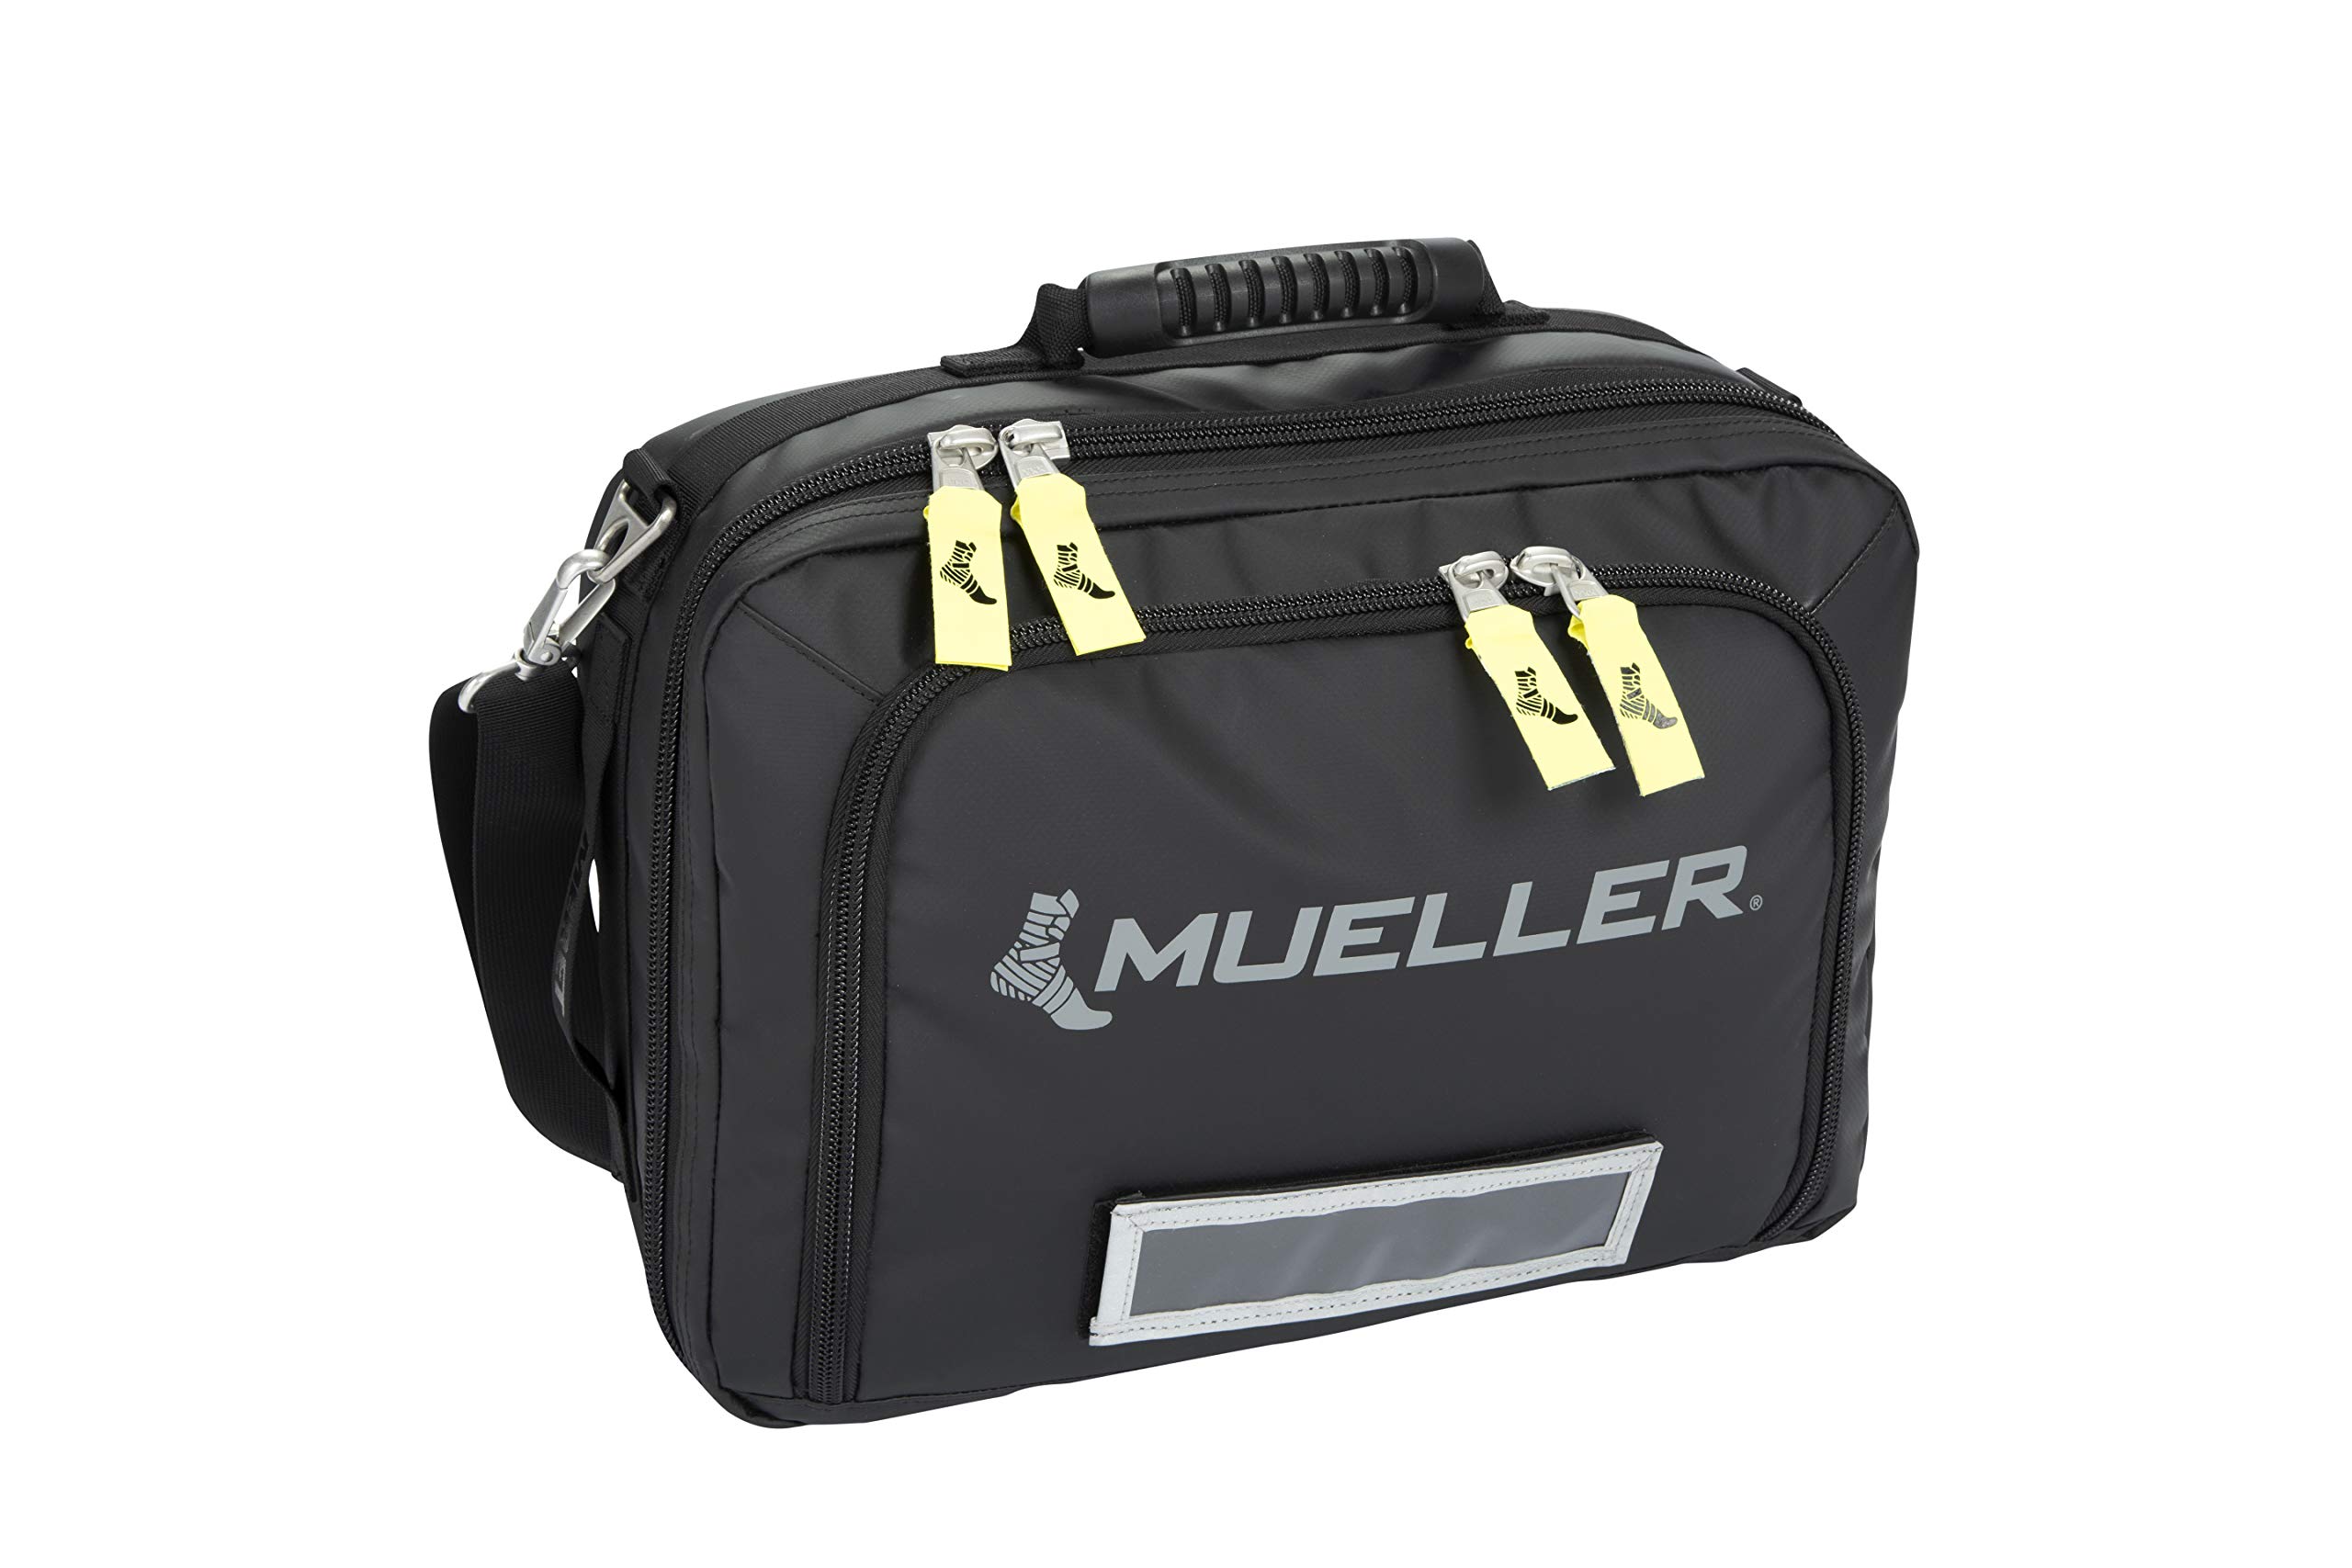 Mueller Medi Kit G2 Athletic Trainer Briefcase, for Men and Women, Black, One Size, 1 Pack